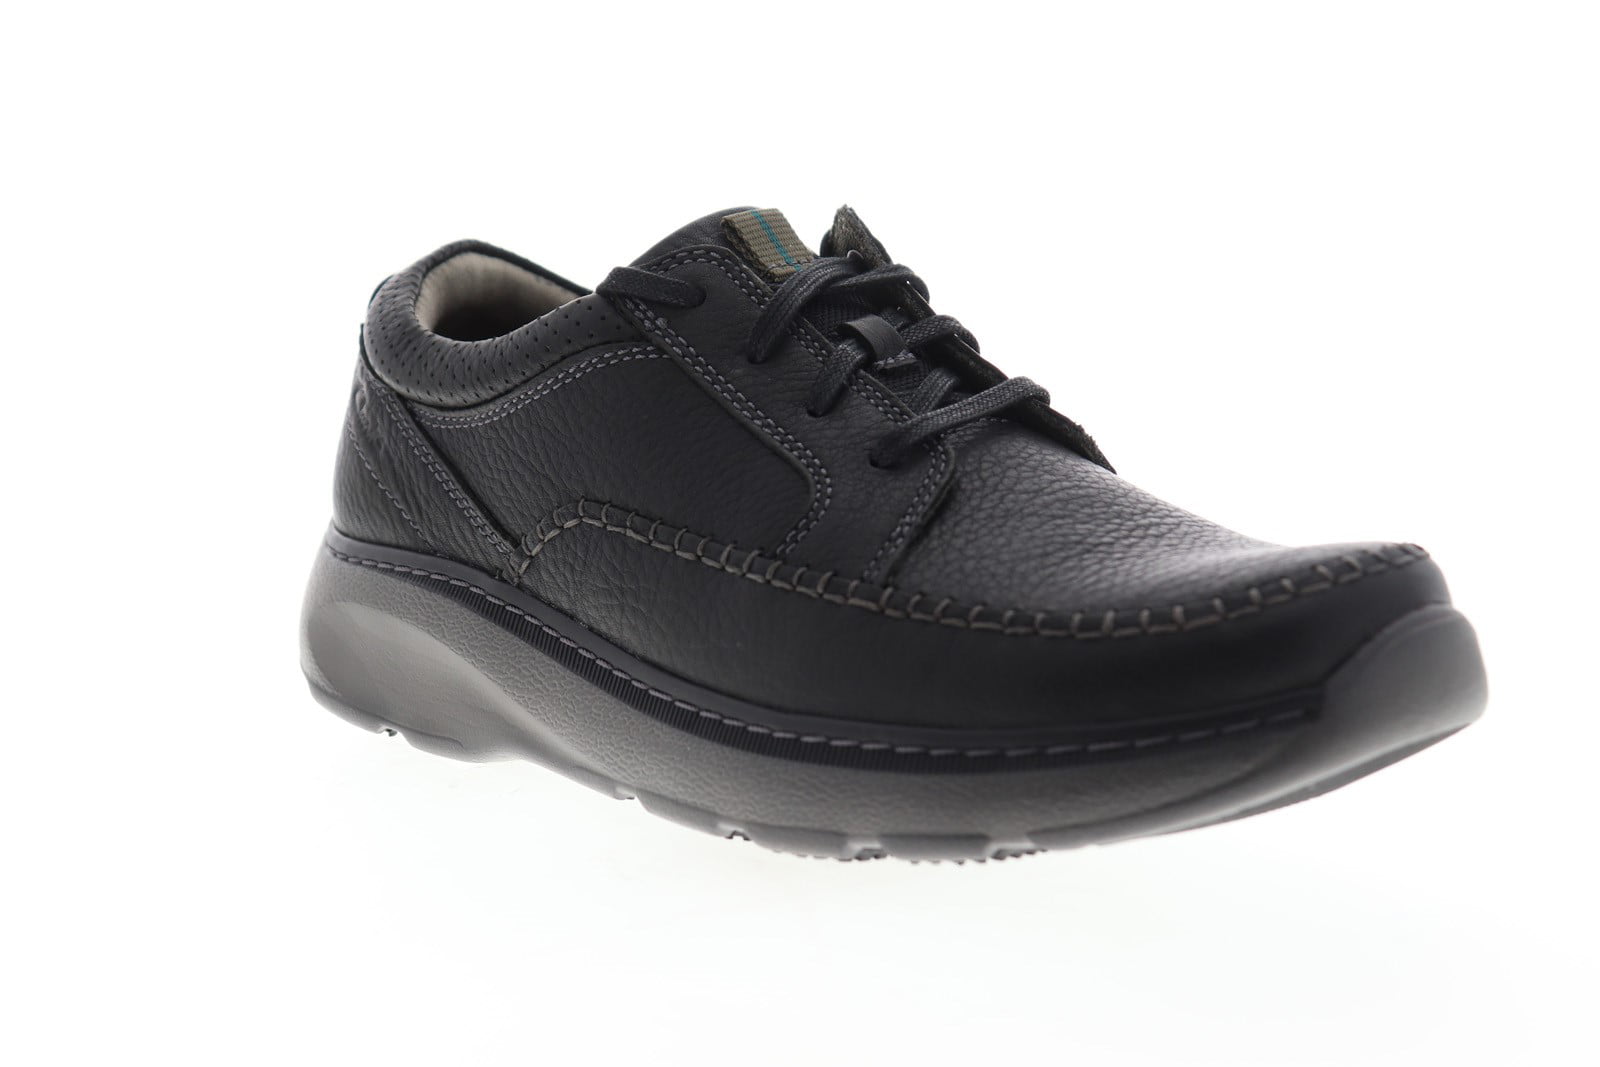 Clarks Mens Leather Shoes 'Charton Vibe' 